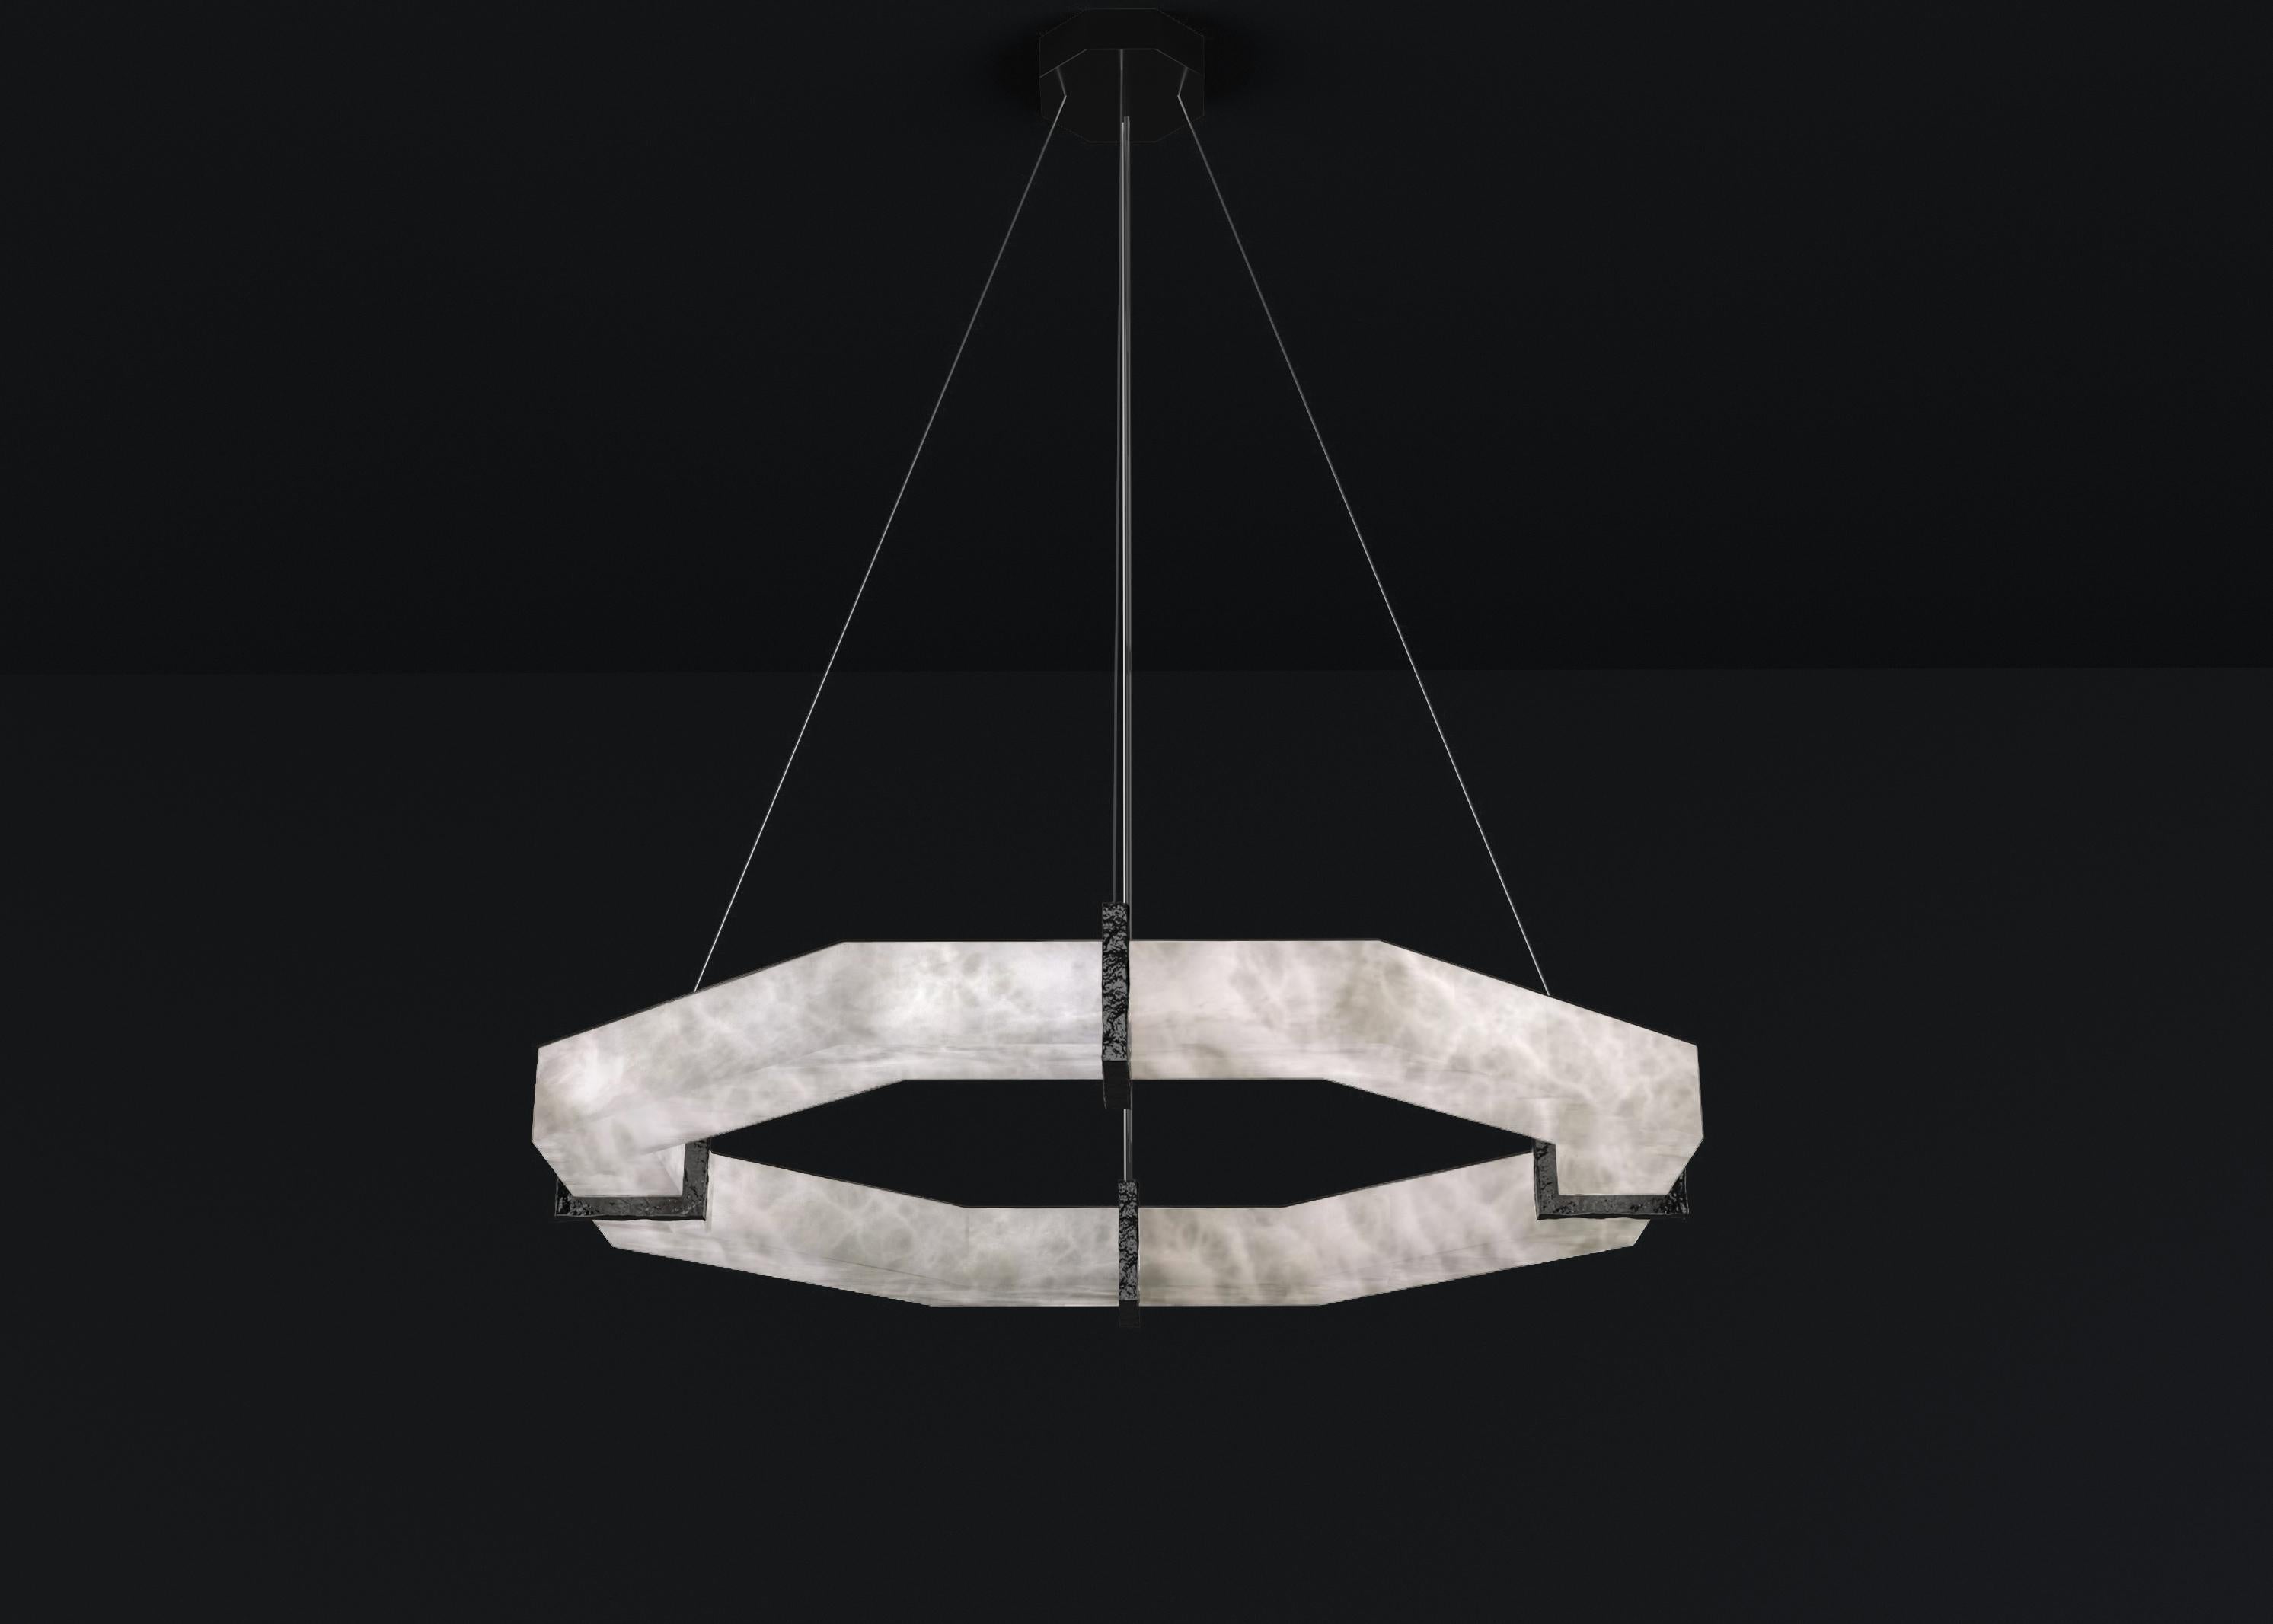 Efesto Shiny Black Metal Pendant Lamp by Alabastro Italiano
Dimensions: D 83 x W 80 x H 11 cm.
Materials: White alabaster and metal.

Available in different finishes: Shiny Silver, Bronze, Brushed Brass, Ruggine of Florence, Brushed Burnished, Shiny